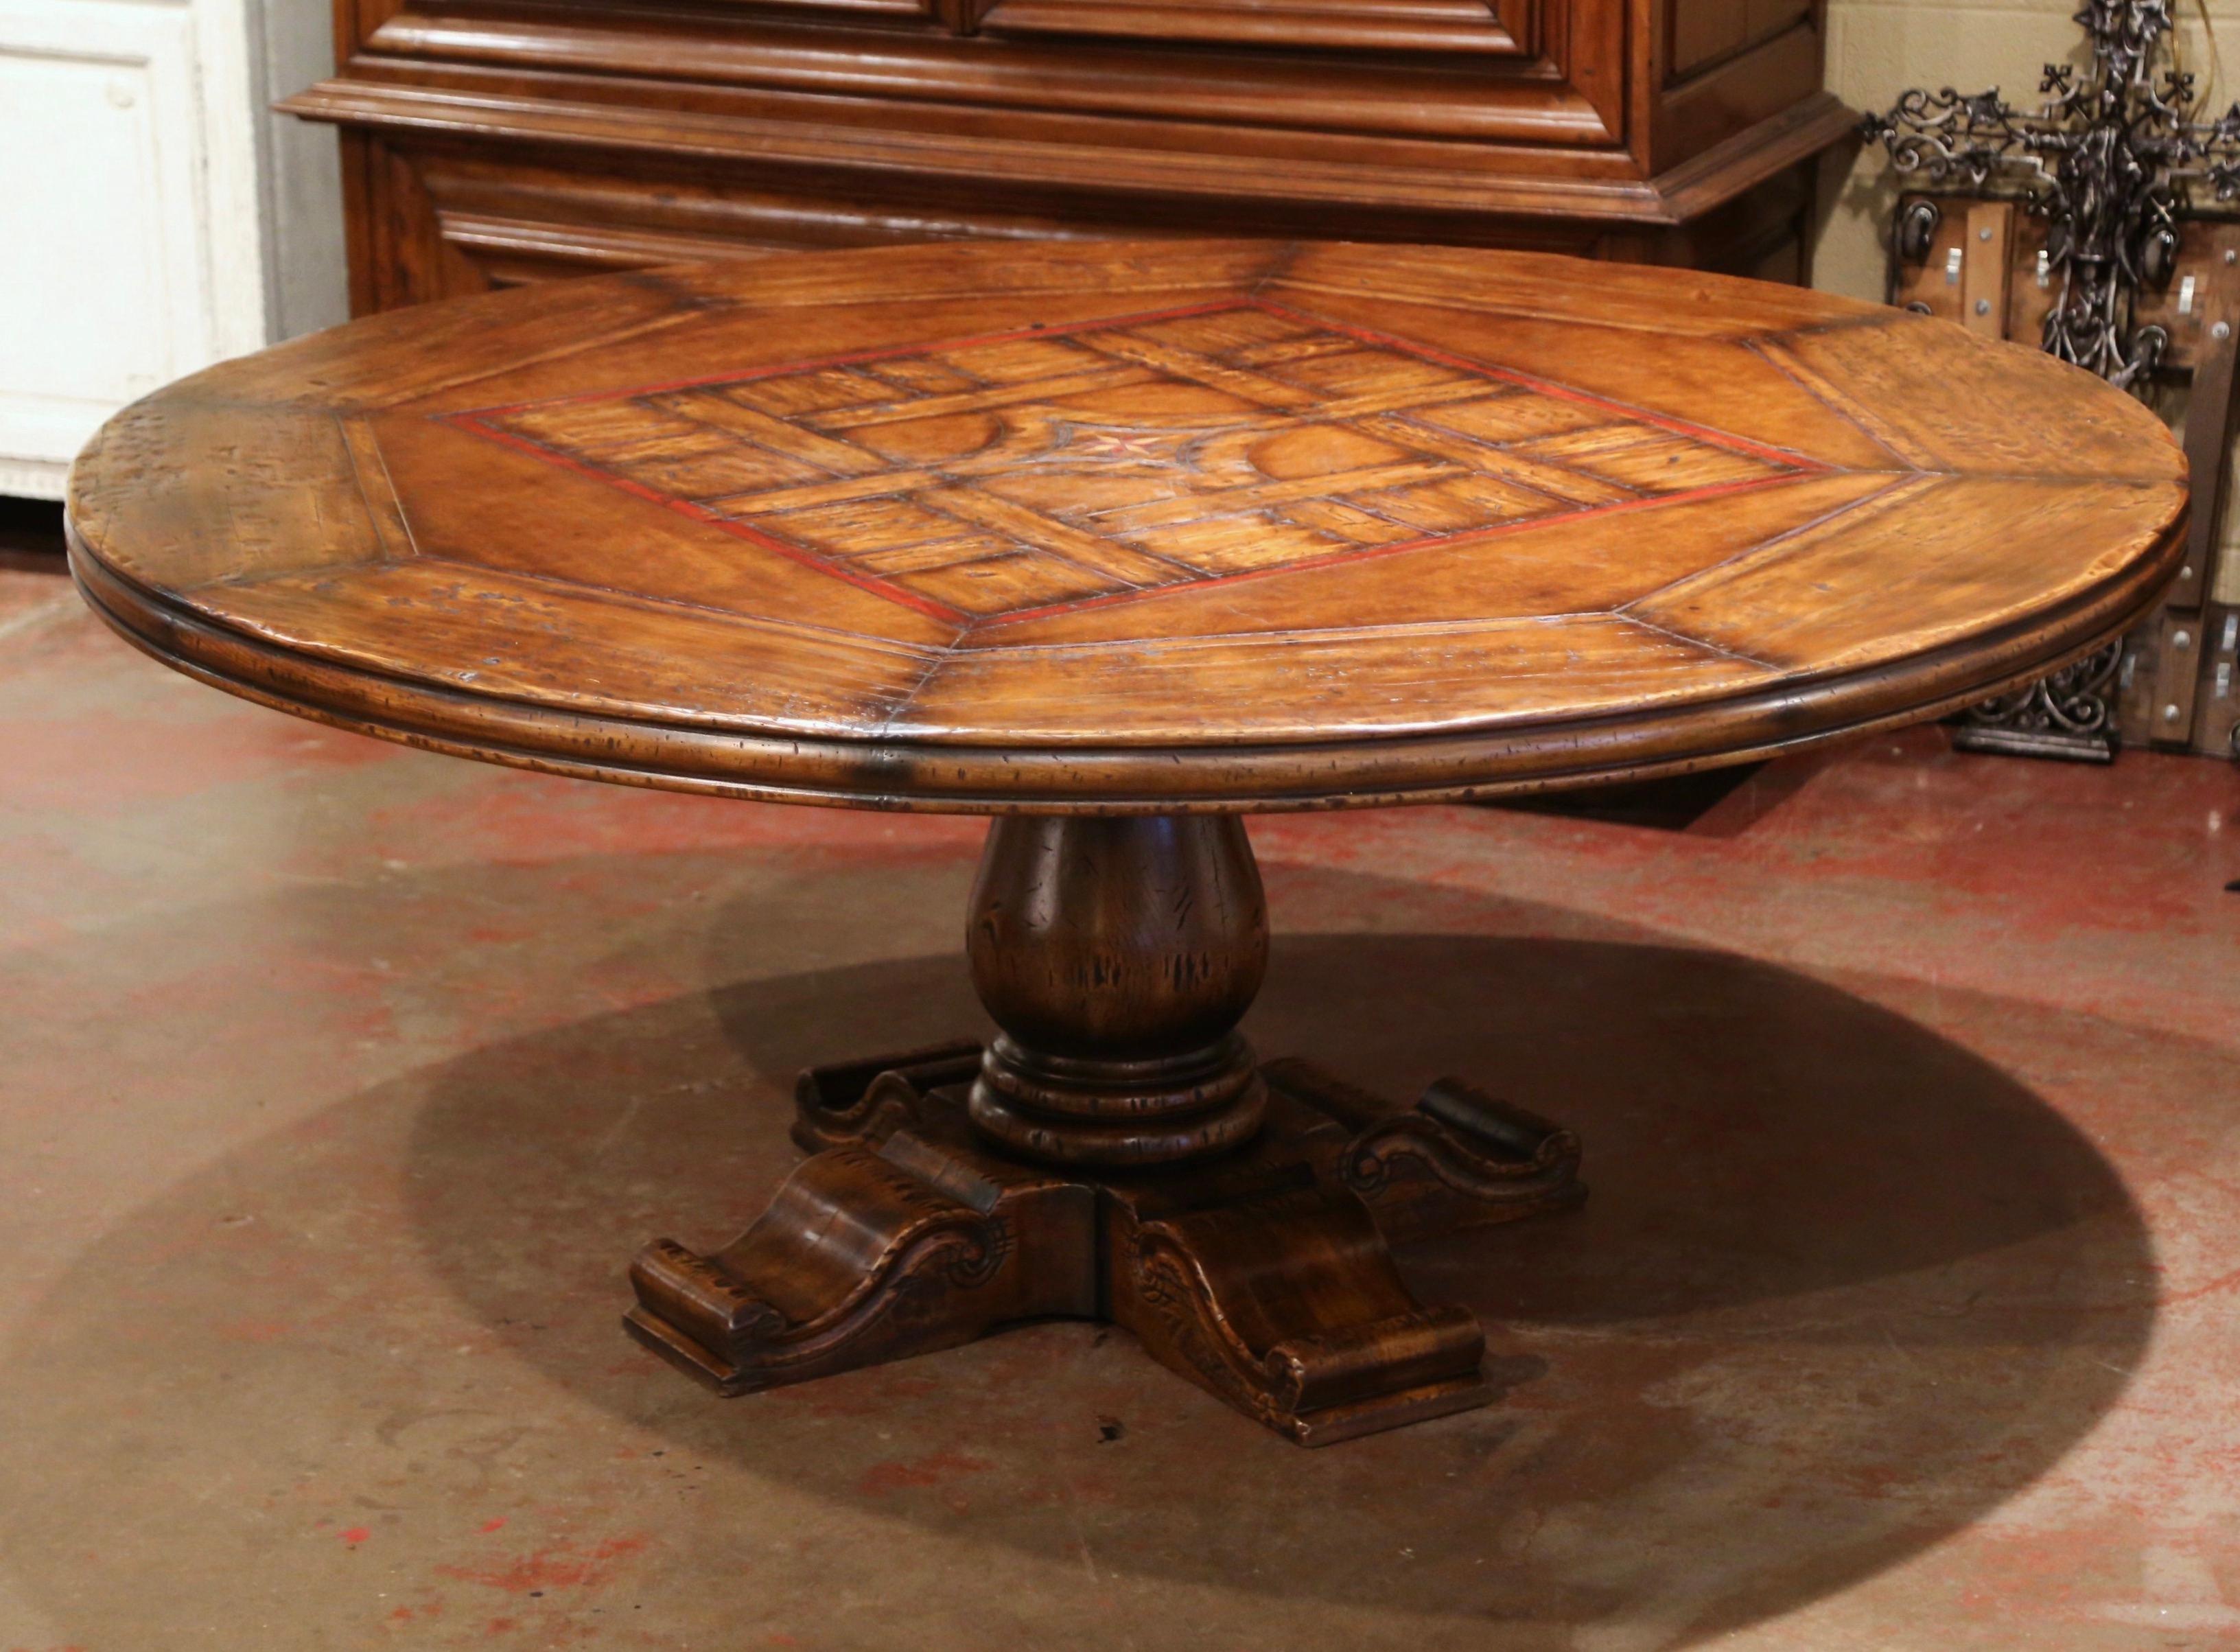 Crafted in the Pyrenees mountains of France half a century ago with 18th and 19th century old timber, the six foot round table stands on an elegant hand carved central column base, supported with four flat carved feet for ultimate stability. The